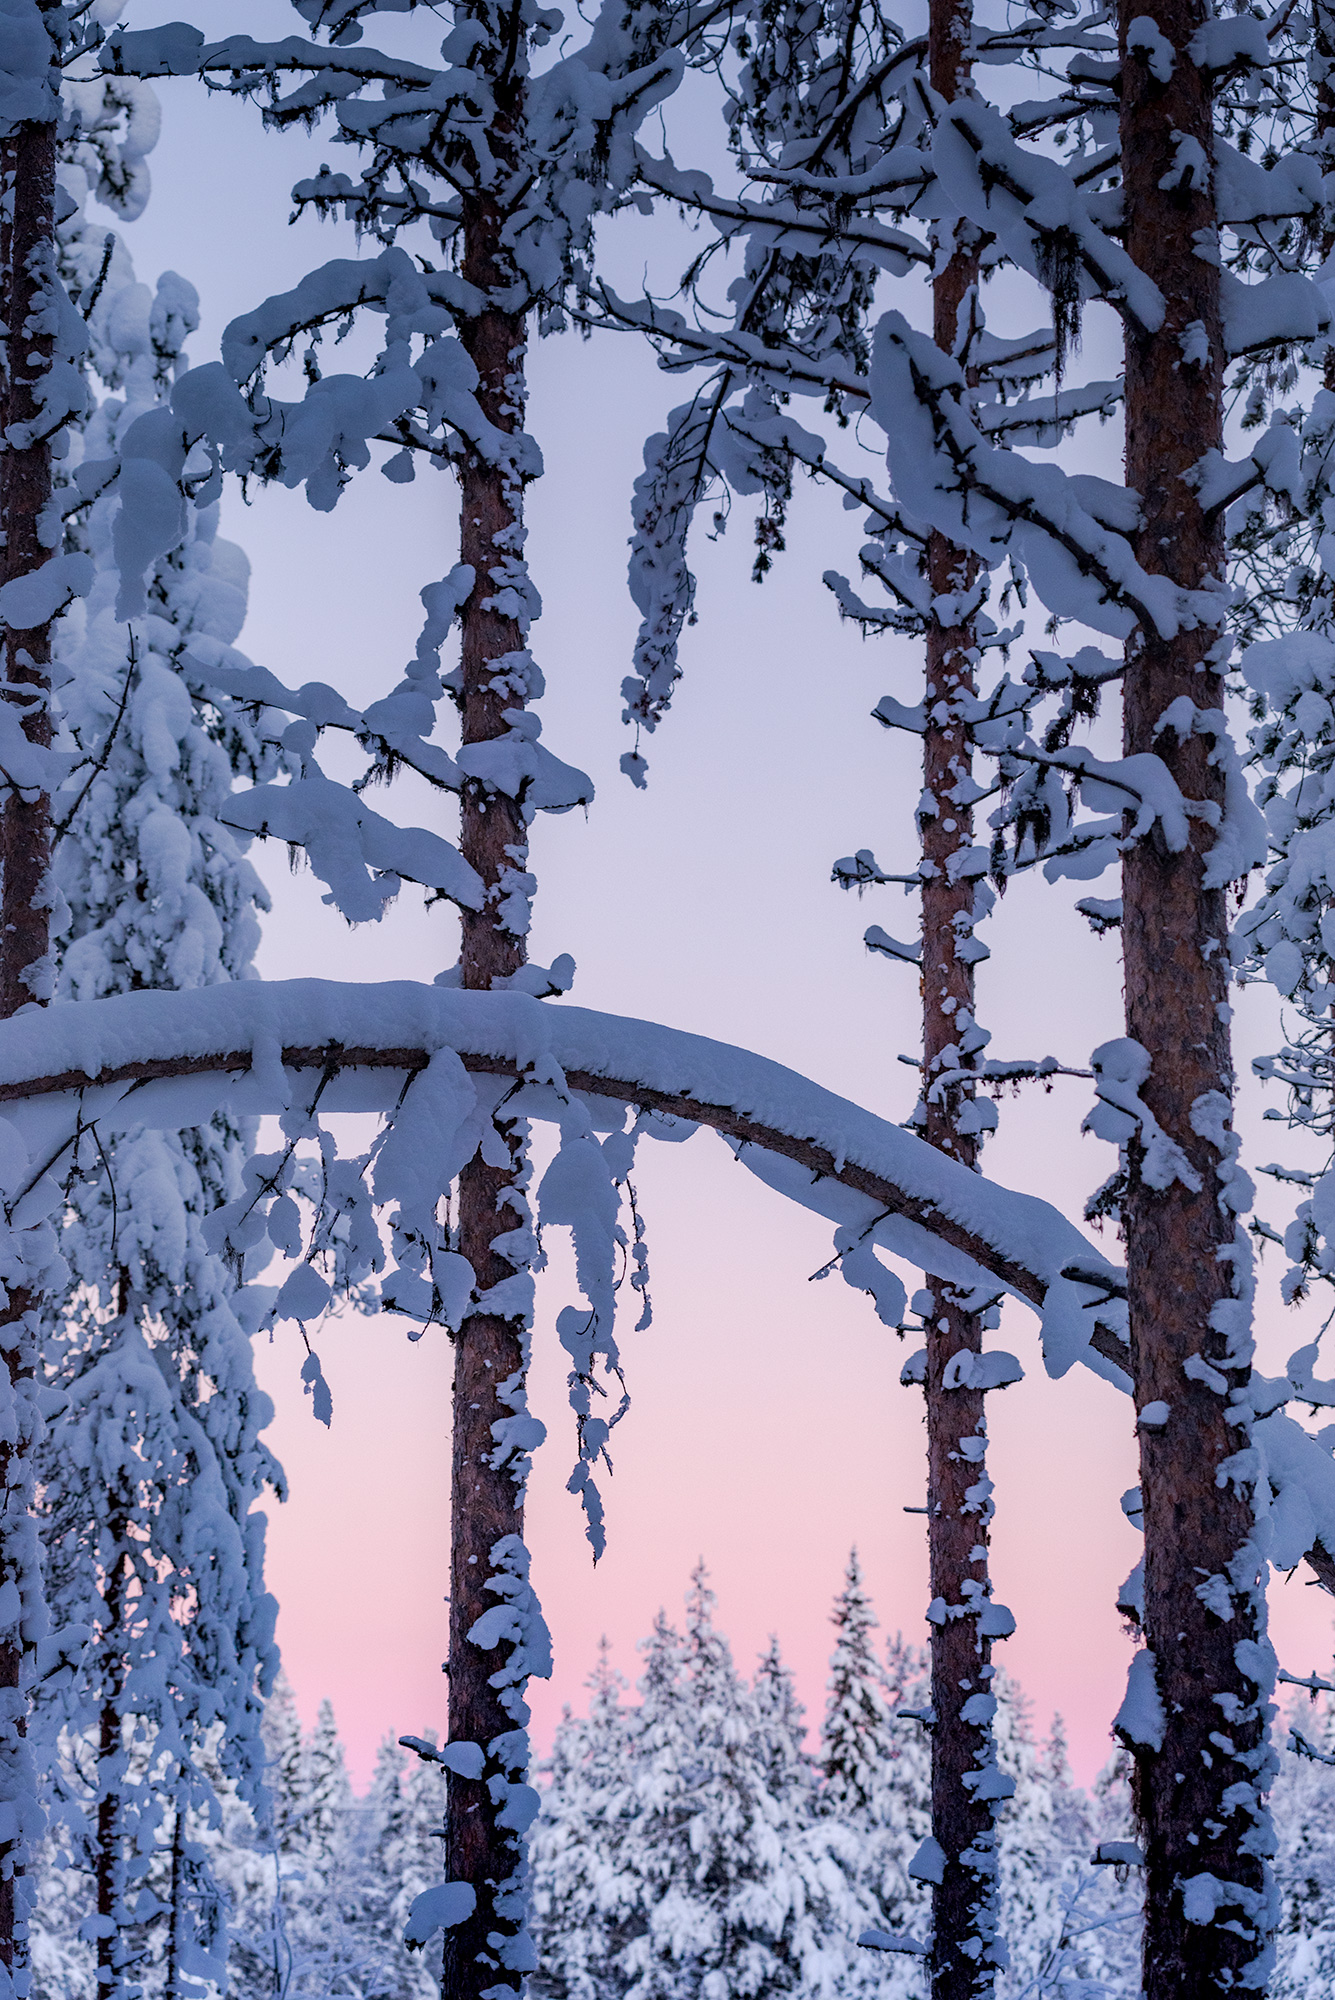 Snow-covered Lapland forest at sunset, photographed by swiss artist Jennifer Esseiva.